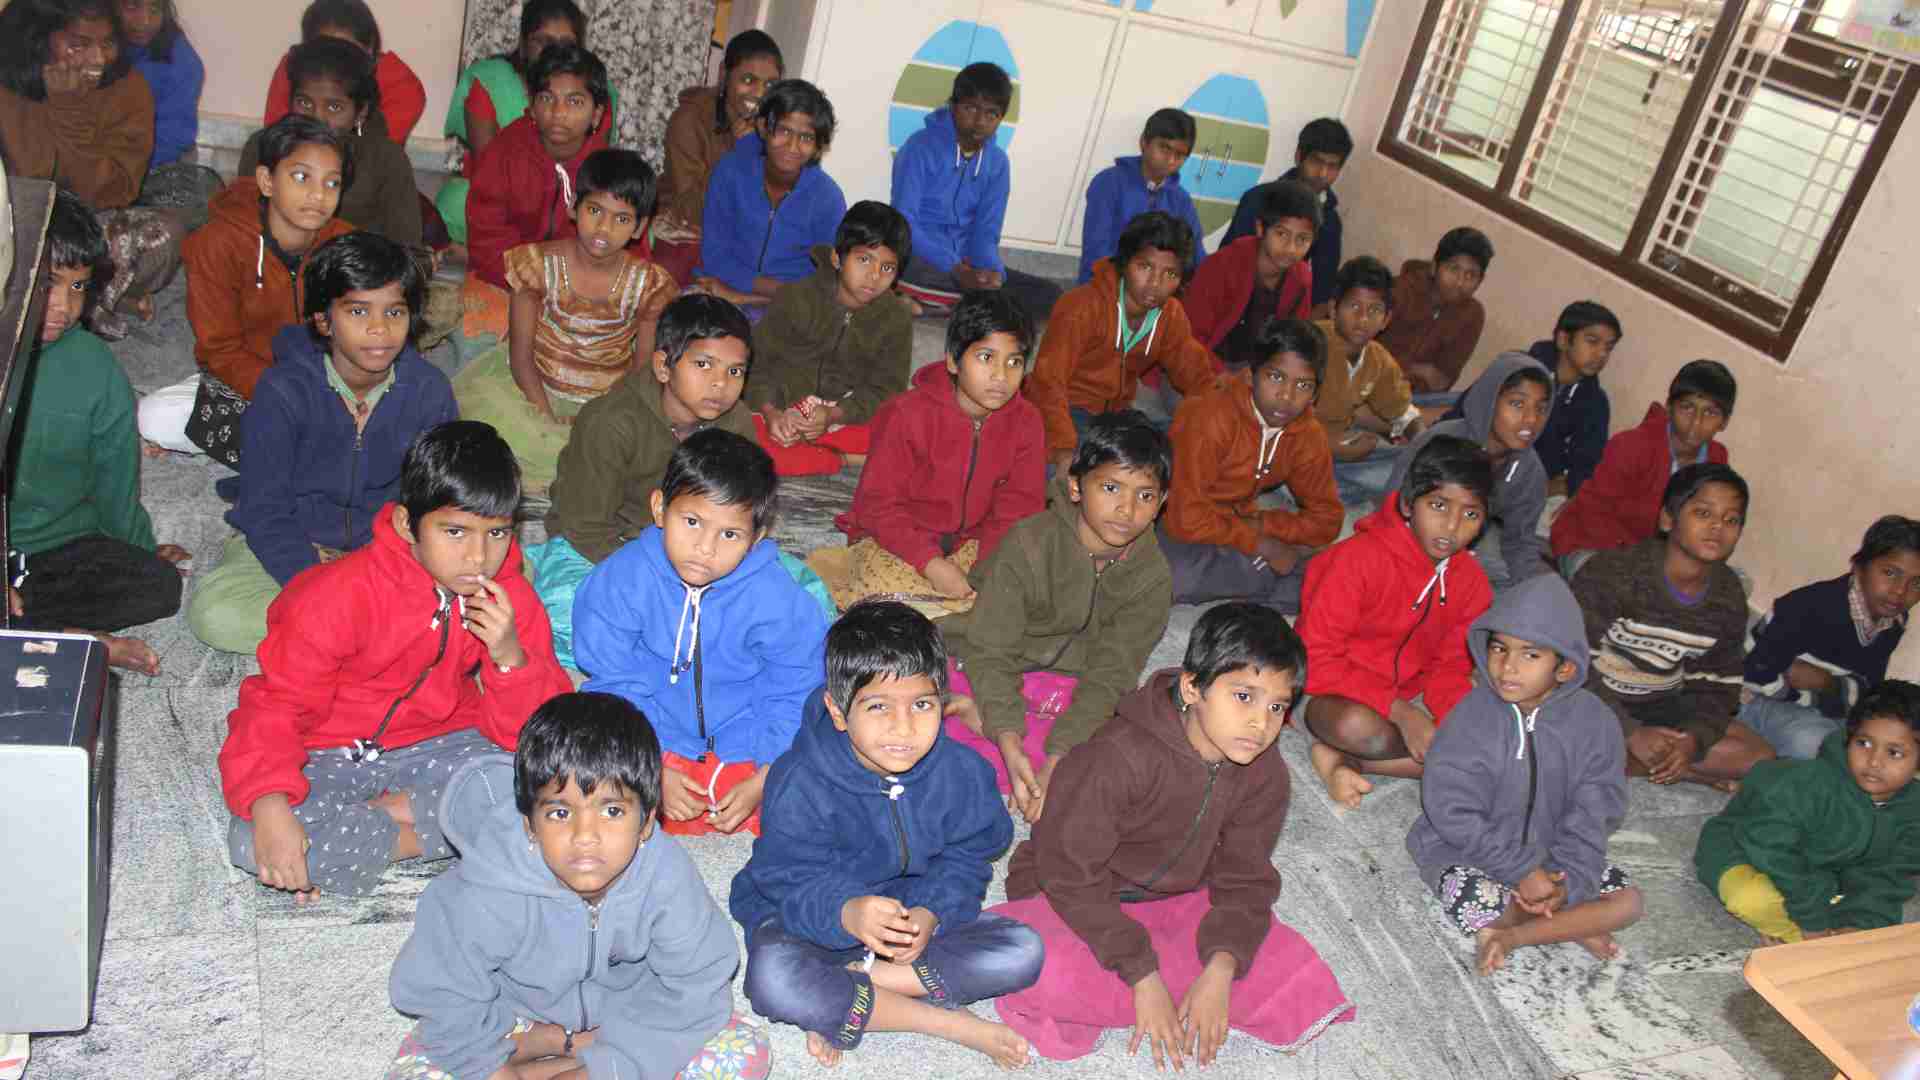 Donate to Disabilty Care Center to help poor children at SERUDS NGO